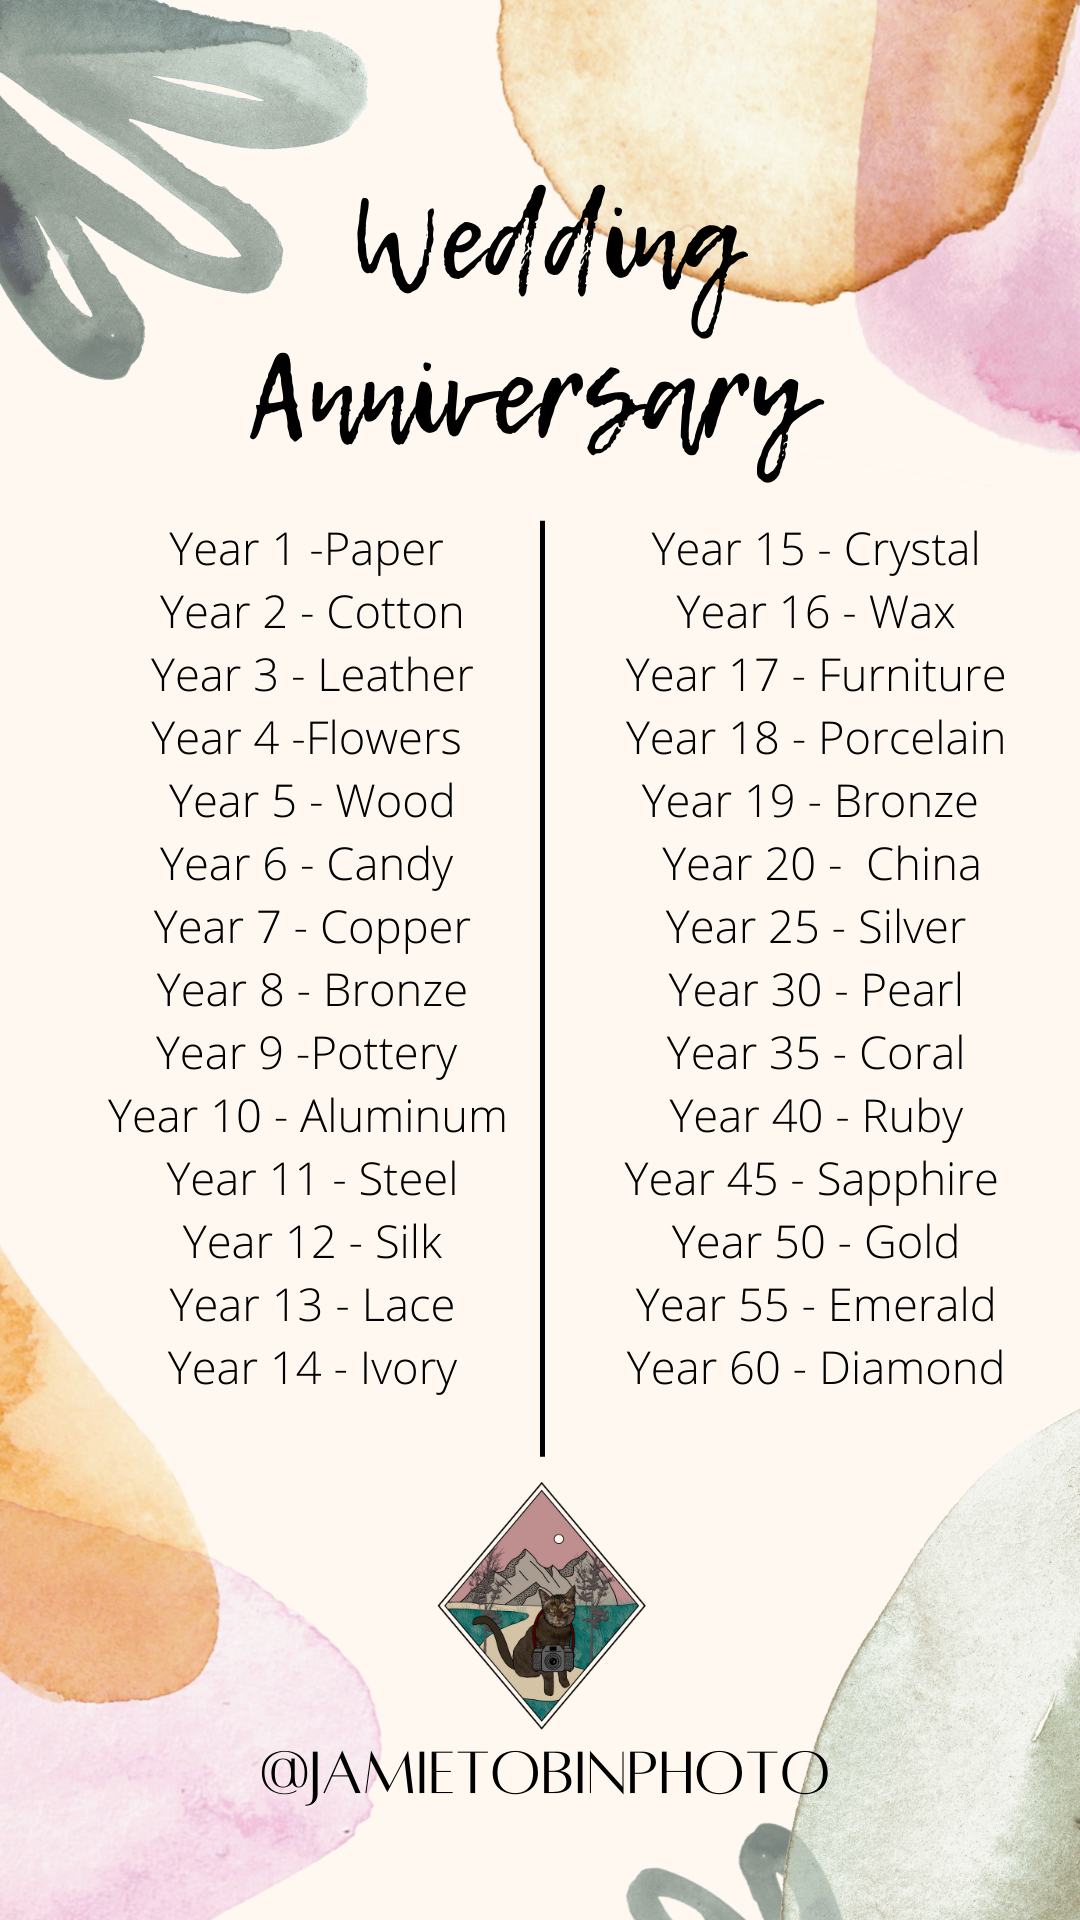 graphic explaining the wedding anniversary from year one to year sixty by presents to buy your spouse